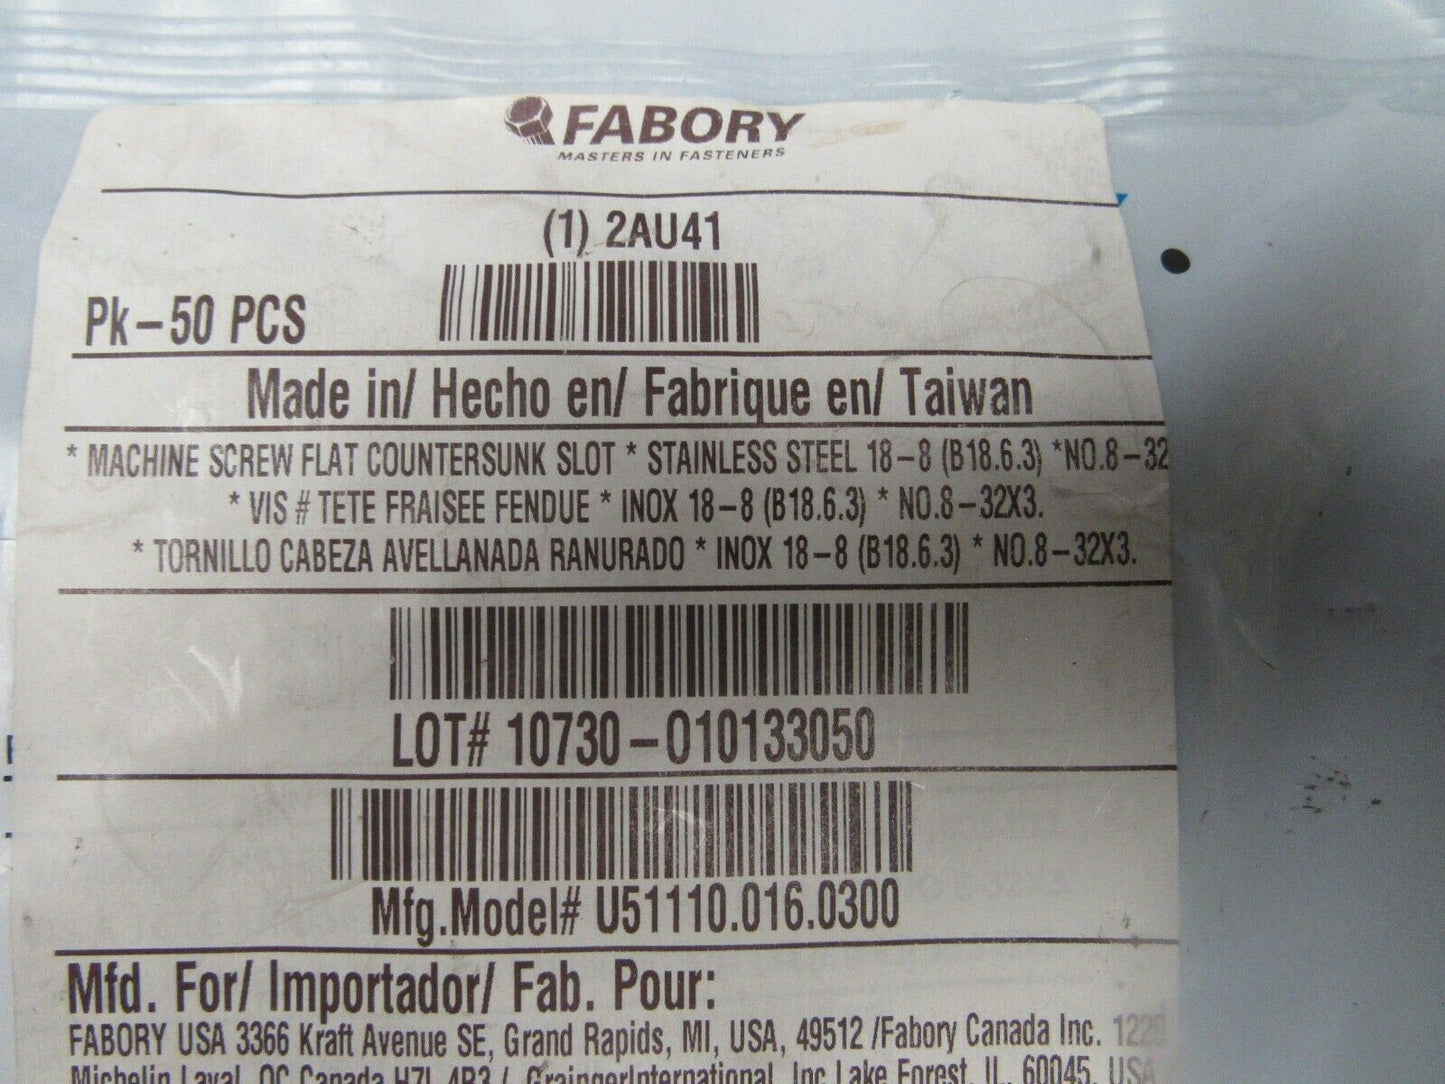 (50) FABORY #8-32 X 3" Machine Screw, Flat, Slotted, 18-8 Stainless Steel, Plain (184238510388-BT40)